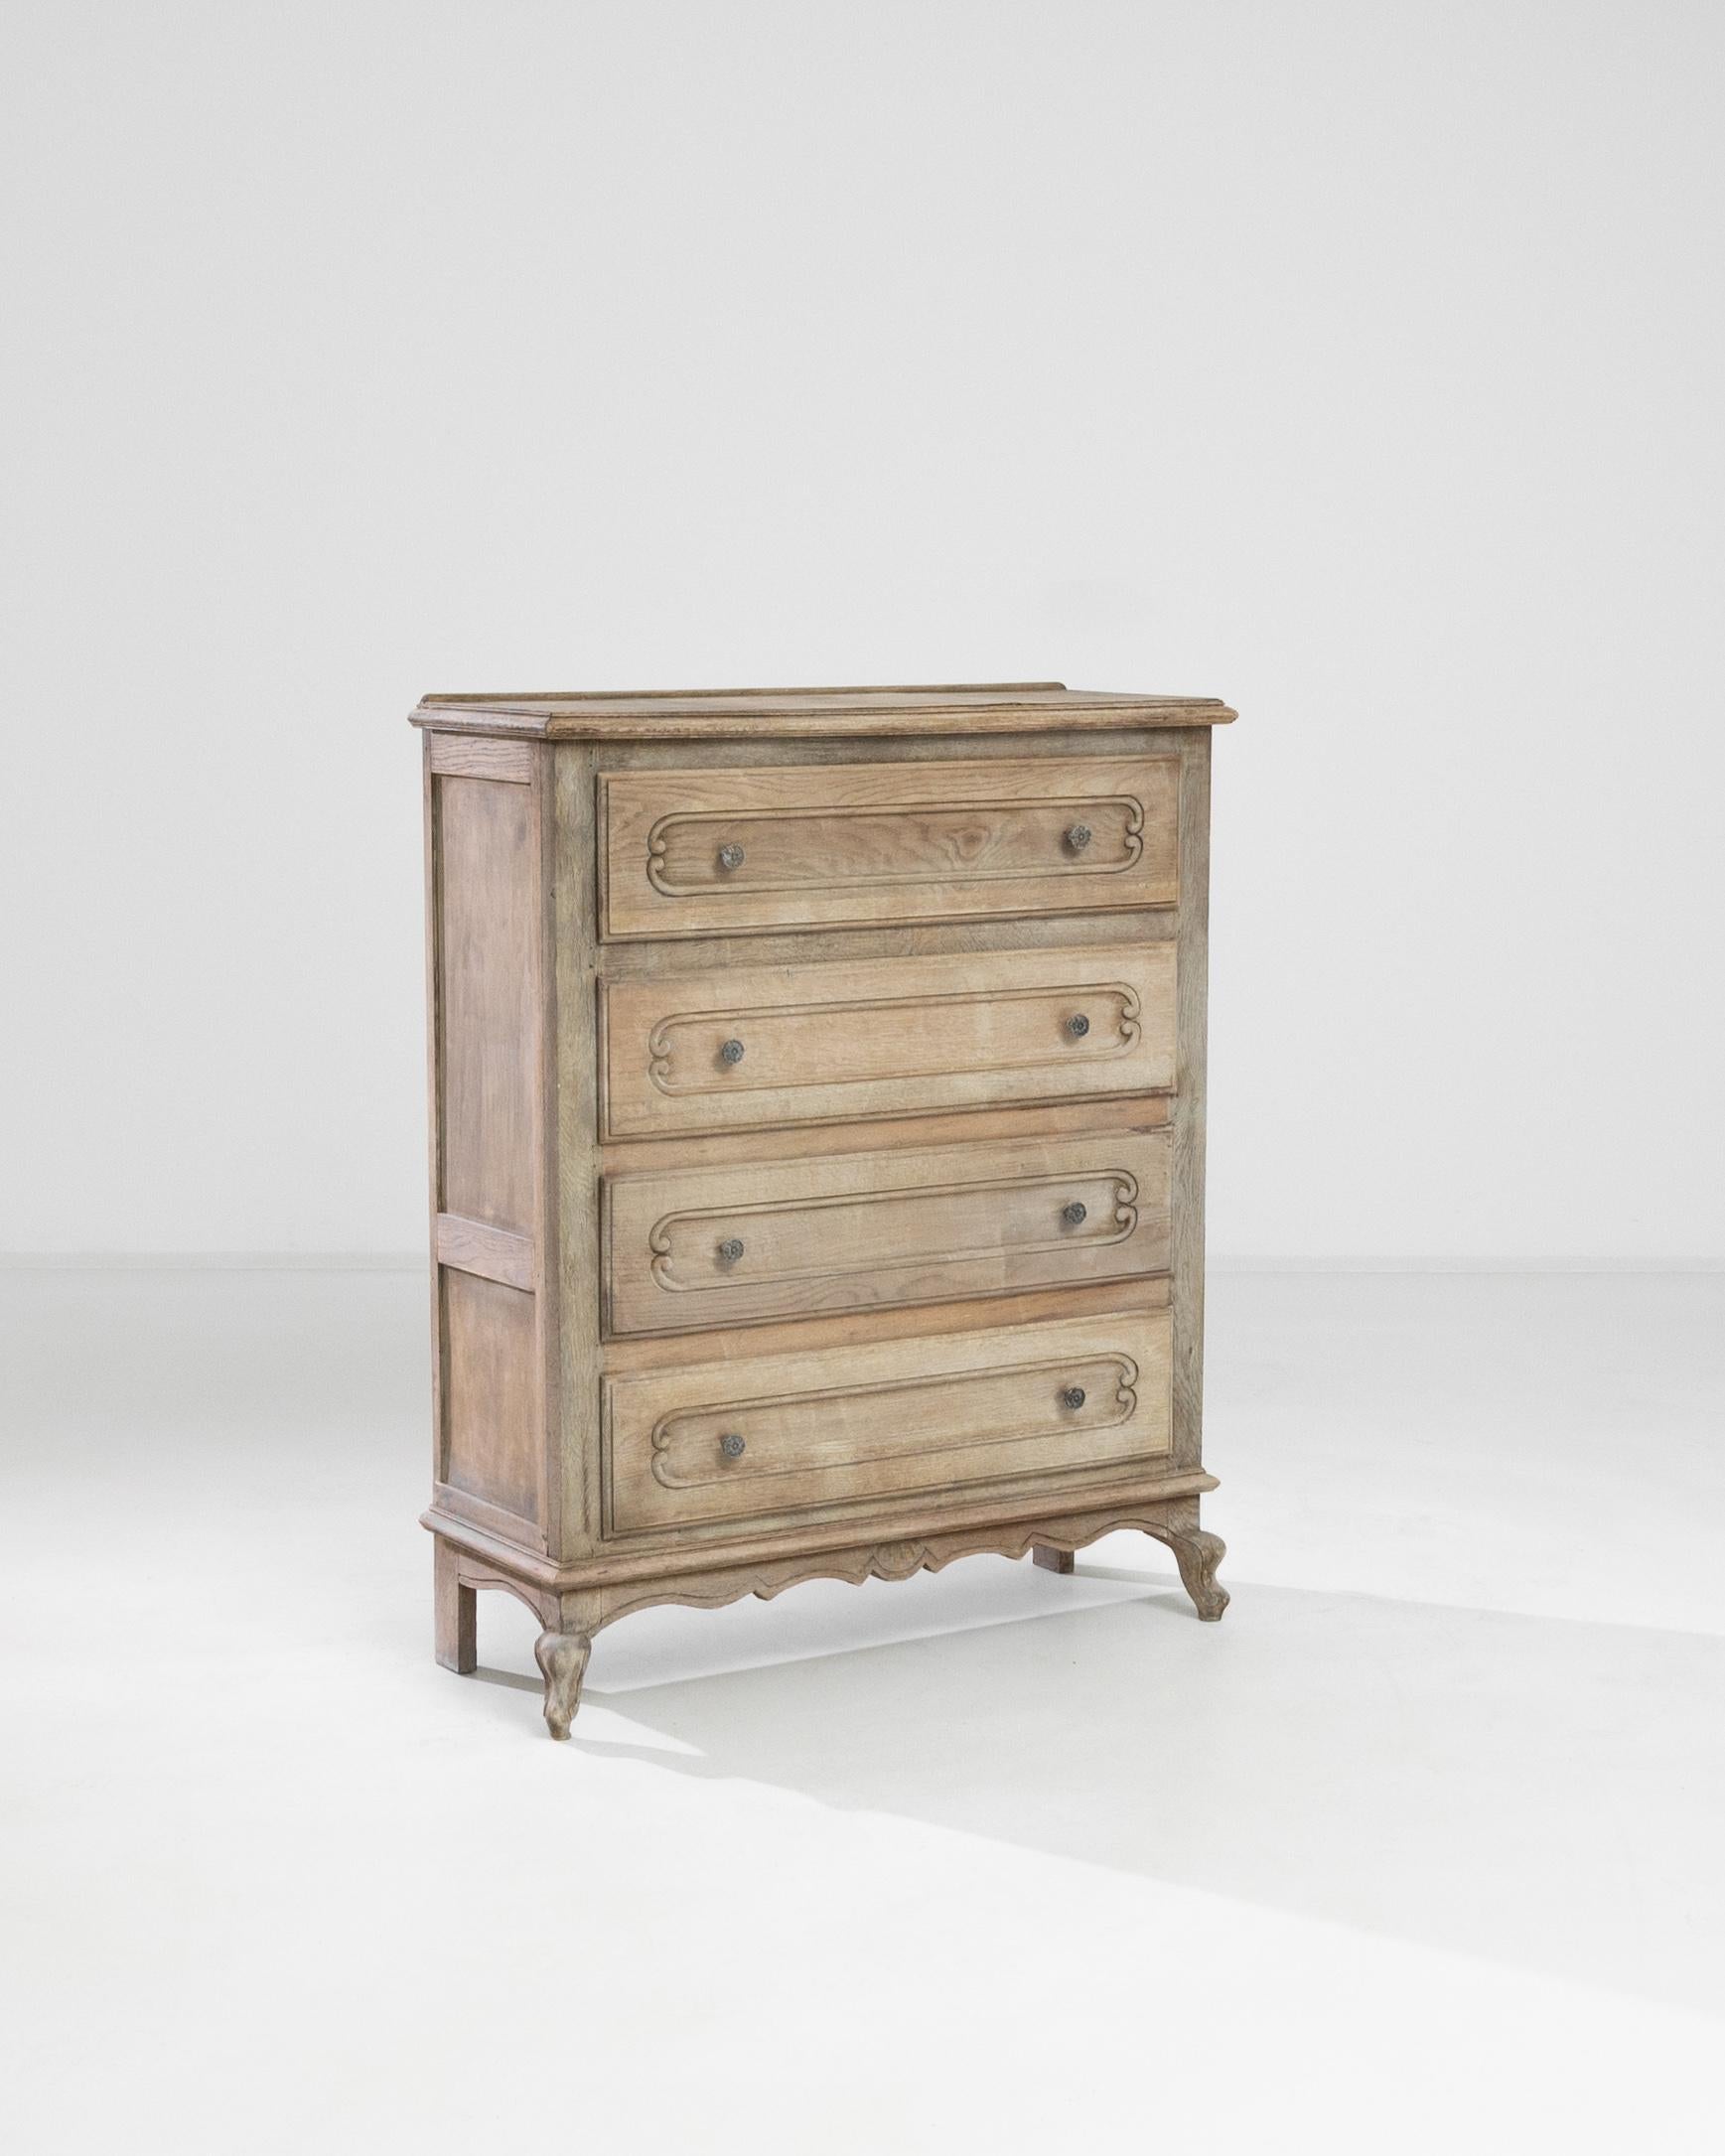 A 20th century chest of drawers from France, this piece features four front drawers, a scalloped apron with shell detail and french cabriole feet. The drawers are carved with elegant volutes and embellished with fleuret brass knobs with gilded